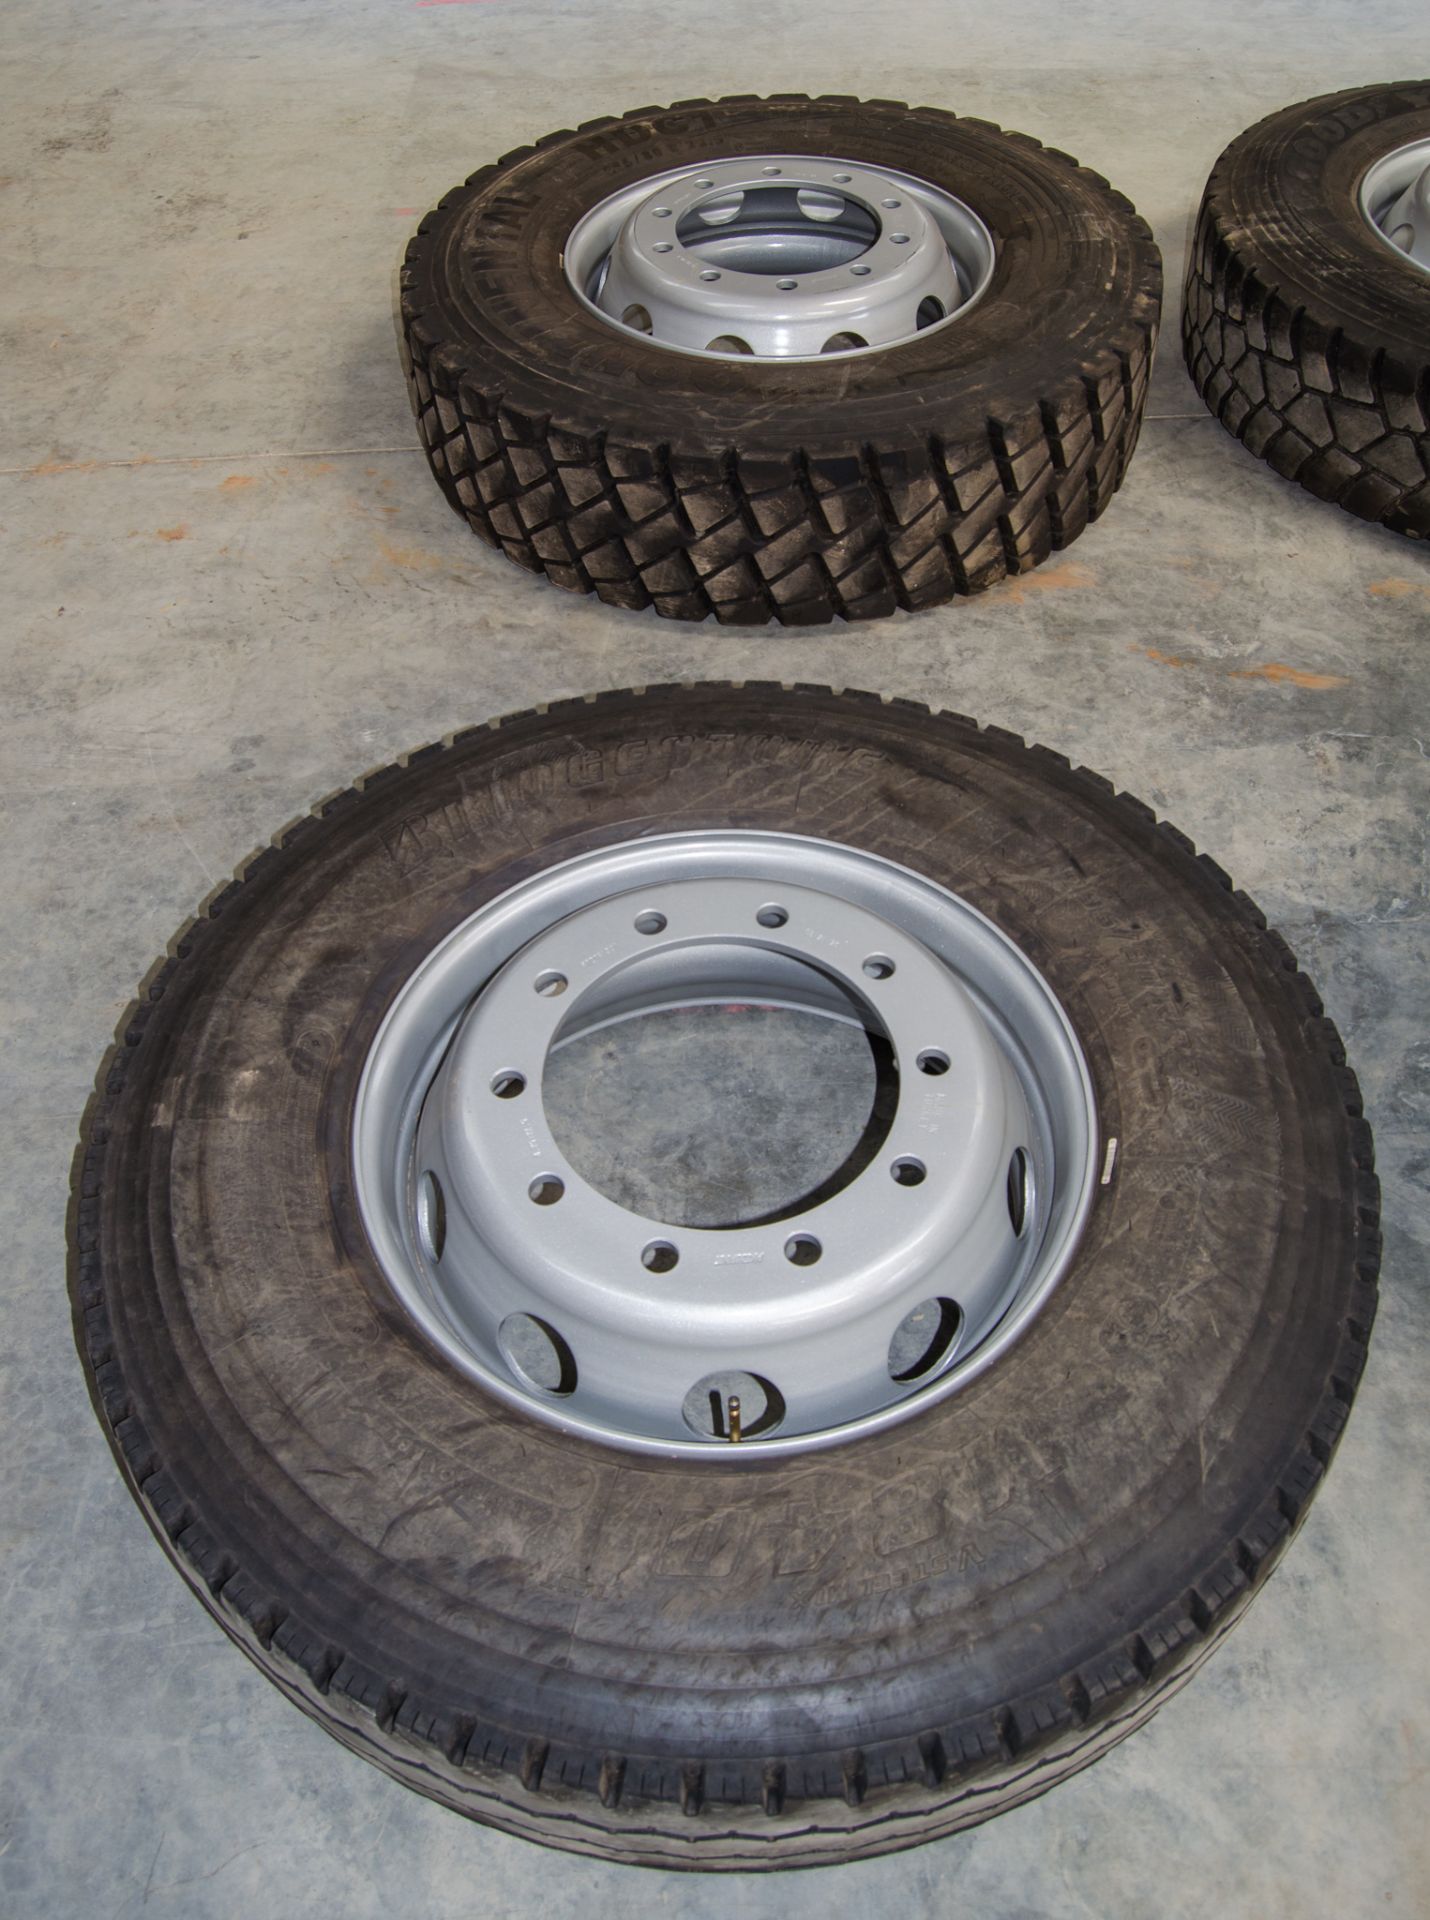 2 - 22.5 inch lorry wheels & tyres to suit 8 wheel tipper lorry c/w 295/80R 22.5 tyres